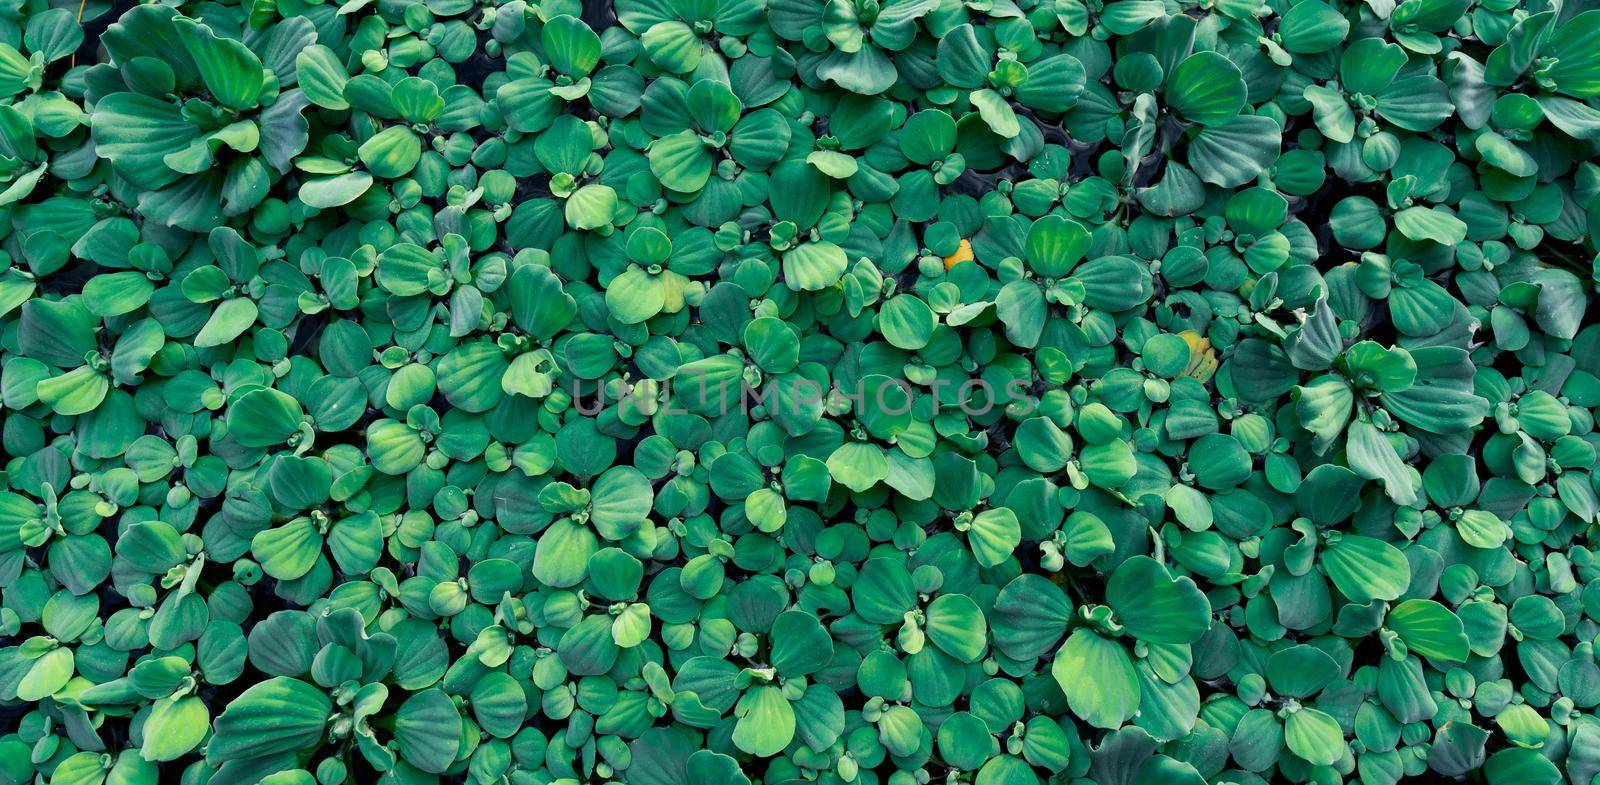 Top view green leaves of water lettuce floating on water surface. Pistia stratiotes or water lettuce is aquatic plant. Invasive species. Closeup leaf of water lettuce pond plants. Nature banner. by Fahroni